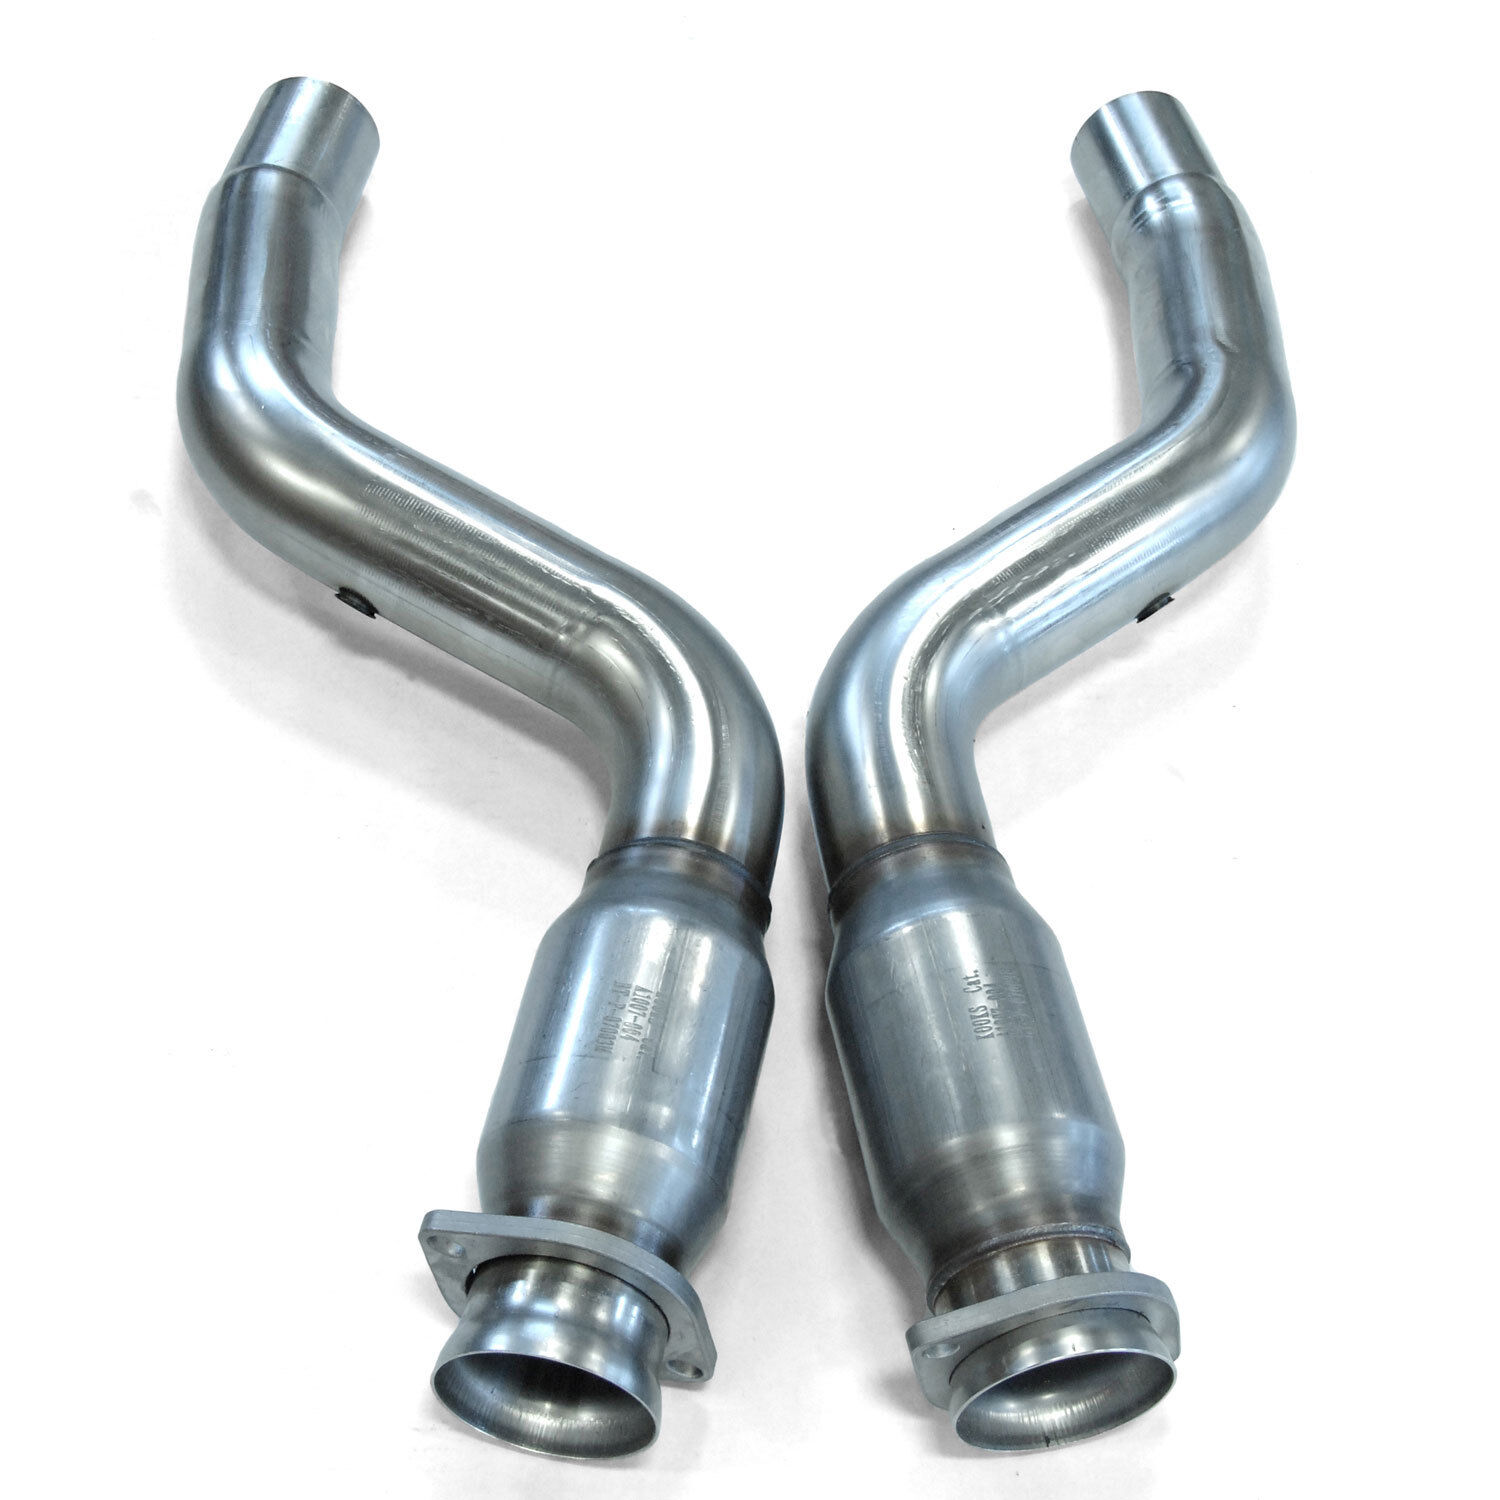 Kooks Catted Off Road Connection Pipes for Dodge Magnum 2005-2008